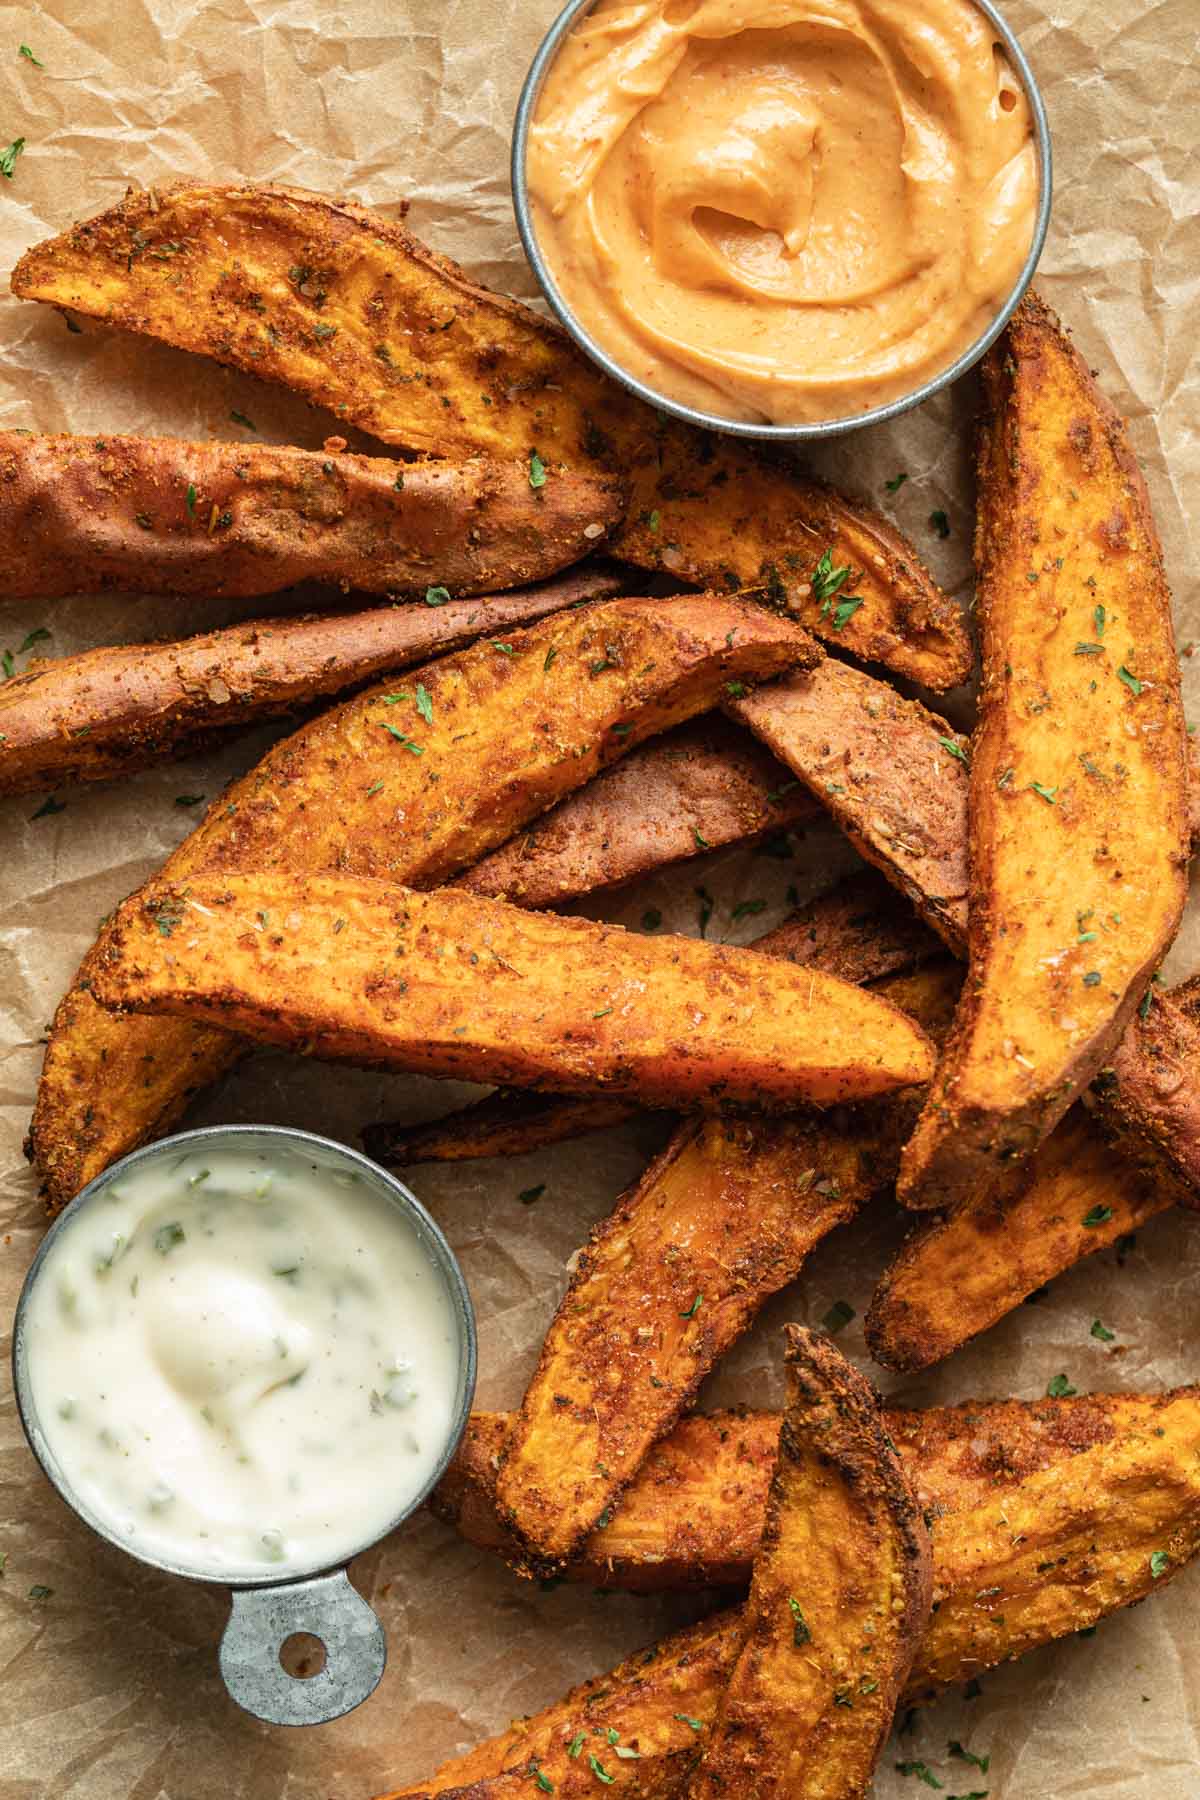 Air fryer sweet potato wedges arranged on parchment paper with a side of ranch dip.